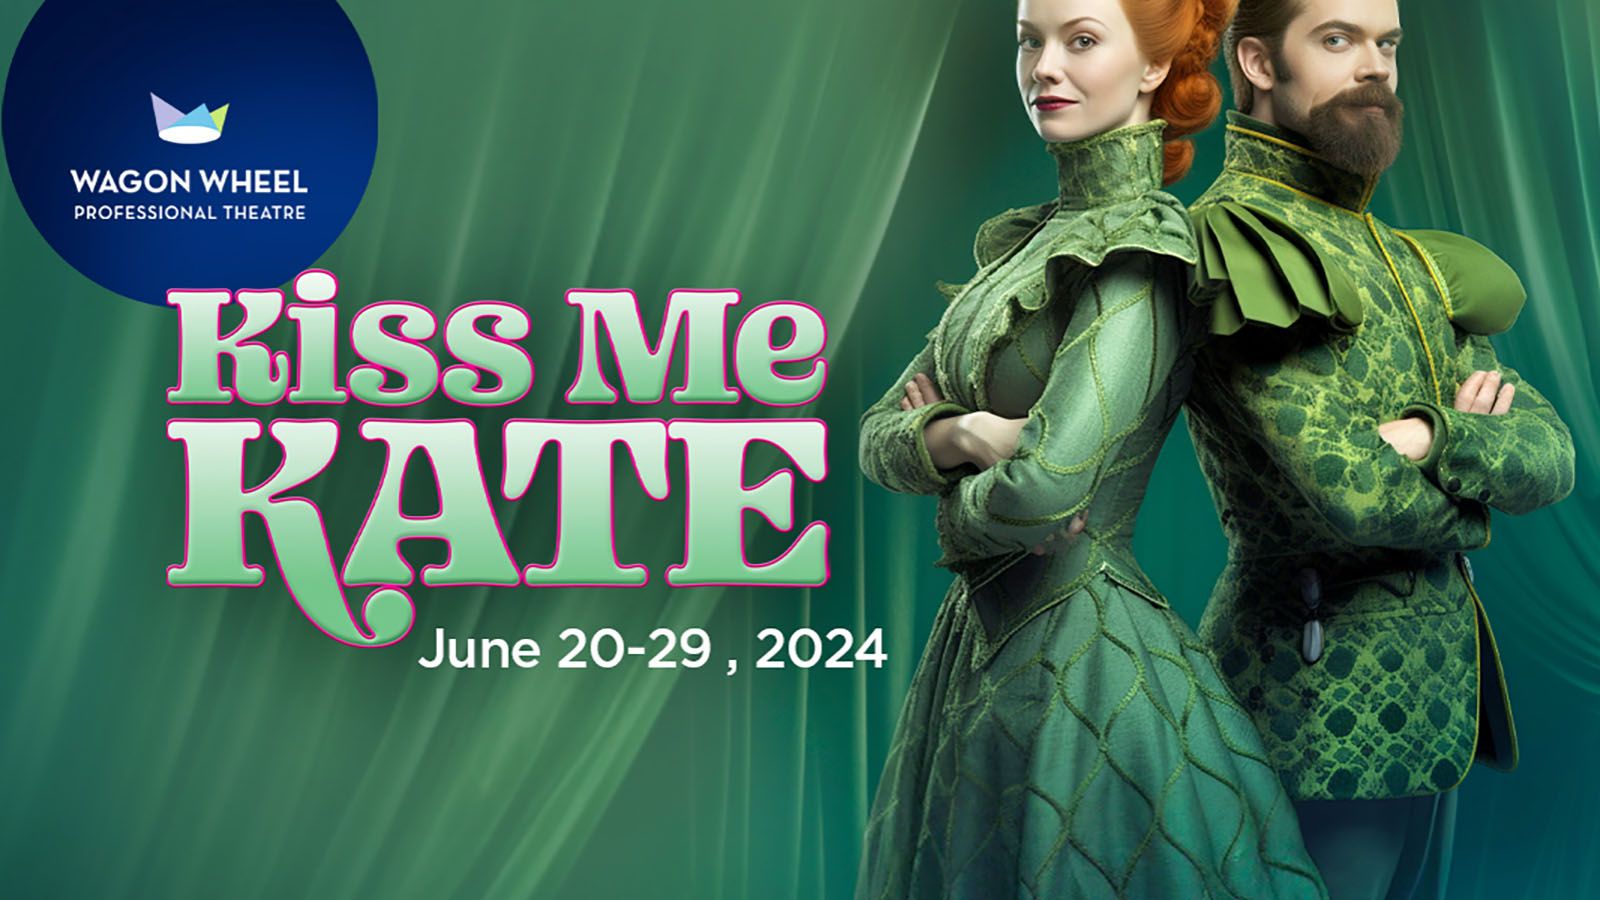 The Wagon Wheel Professional Theatre will present Kiss Me, Kate from June 20-29.